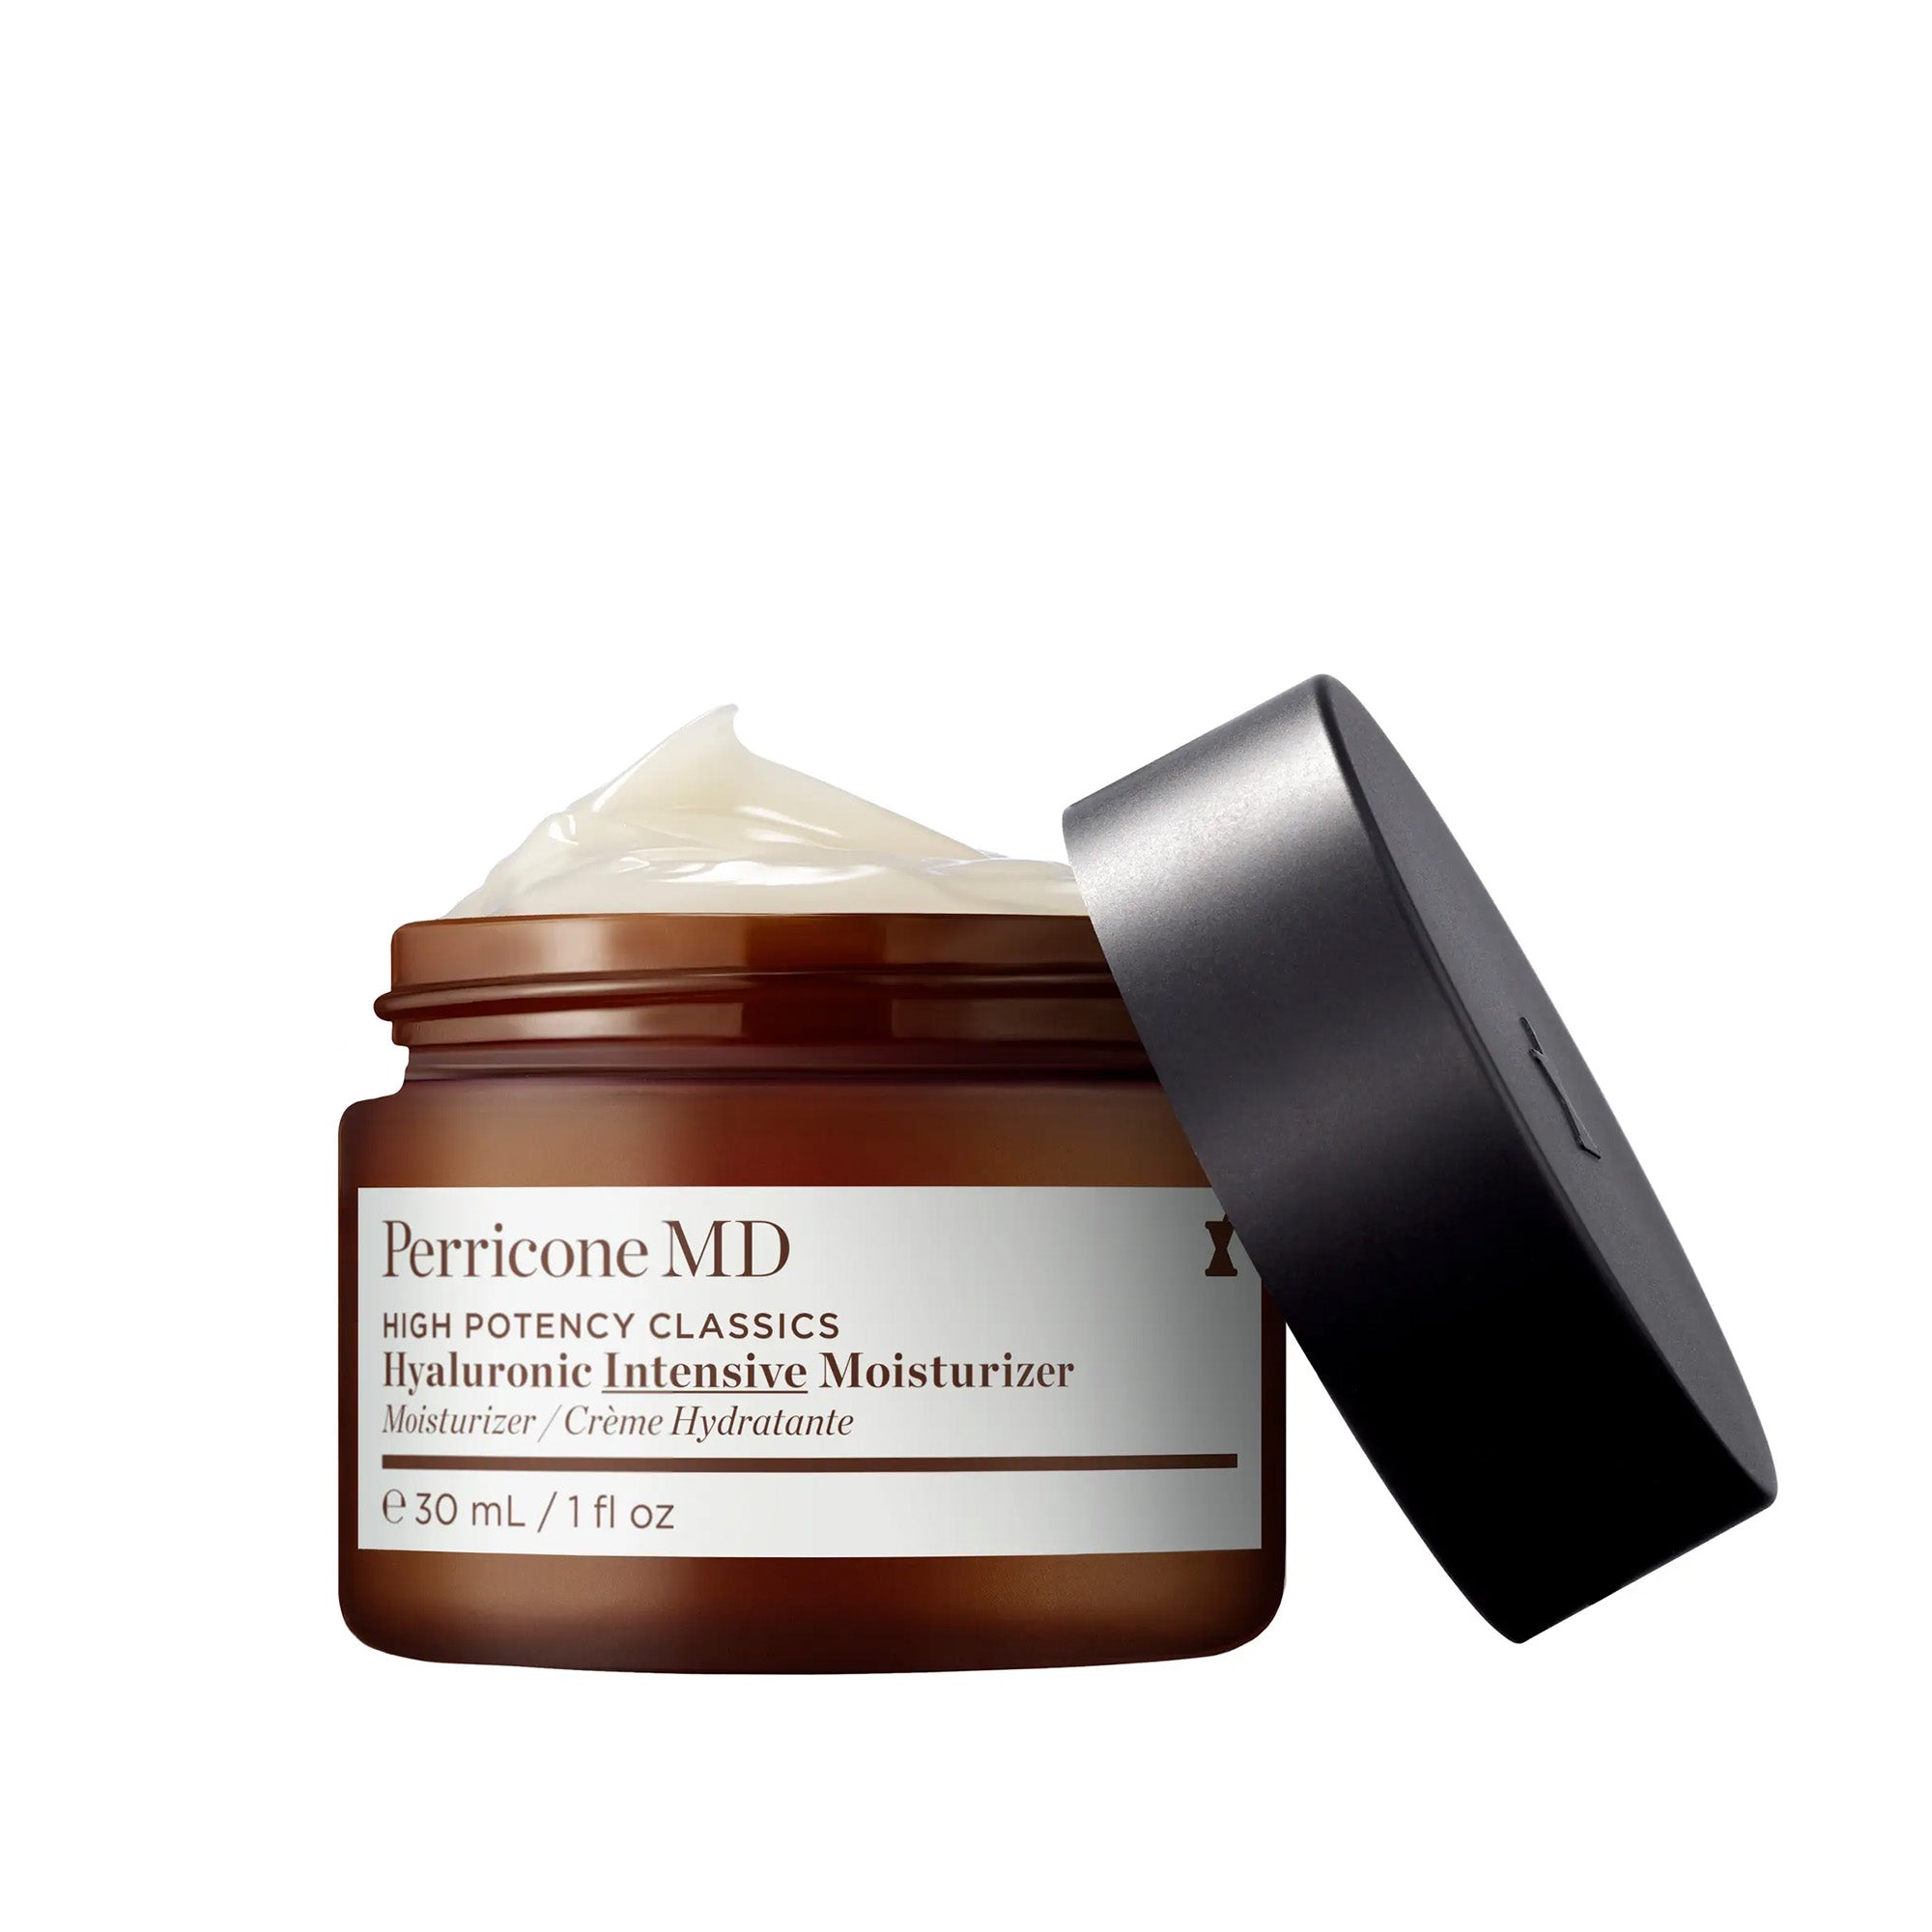 Perricone MD High Potency Classics Hyaluronic Intensive Moisturizer / 1OZ